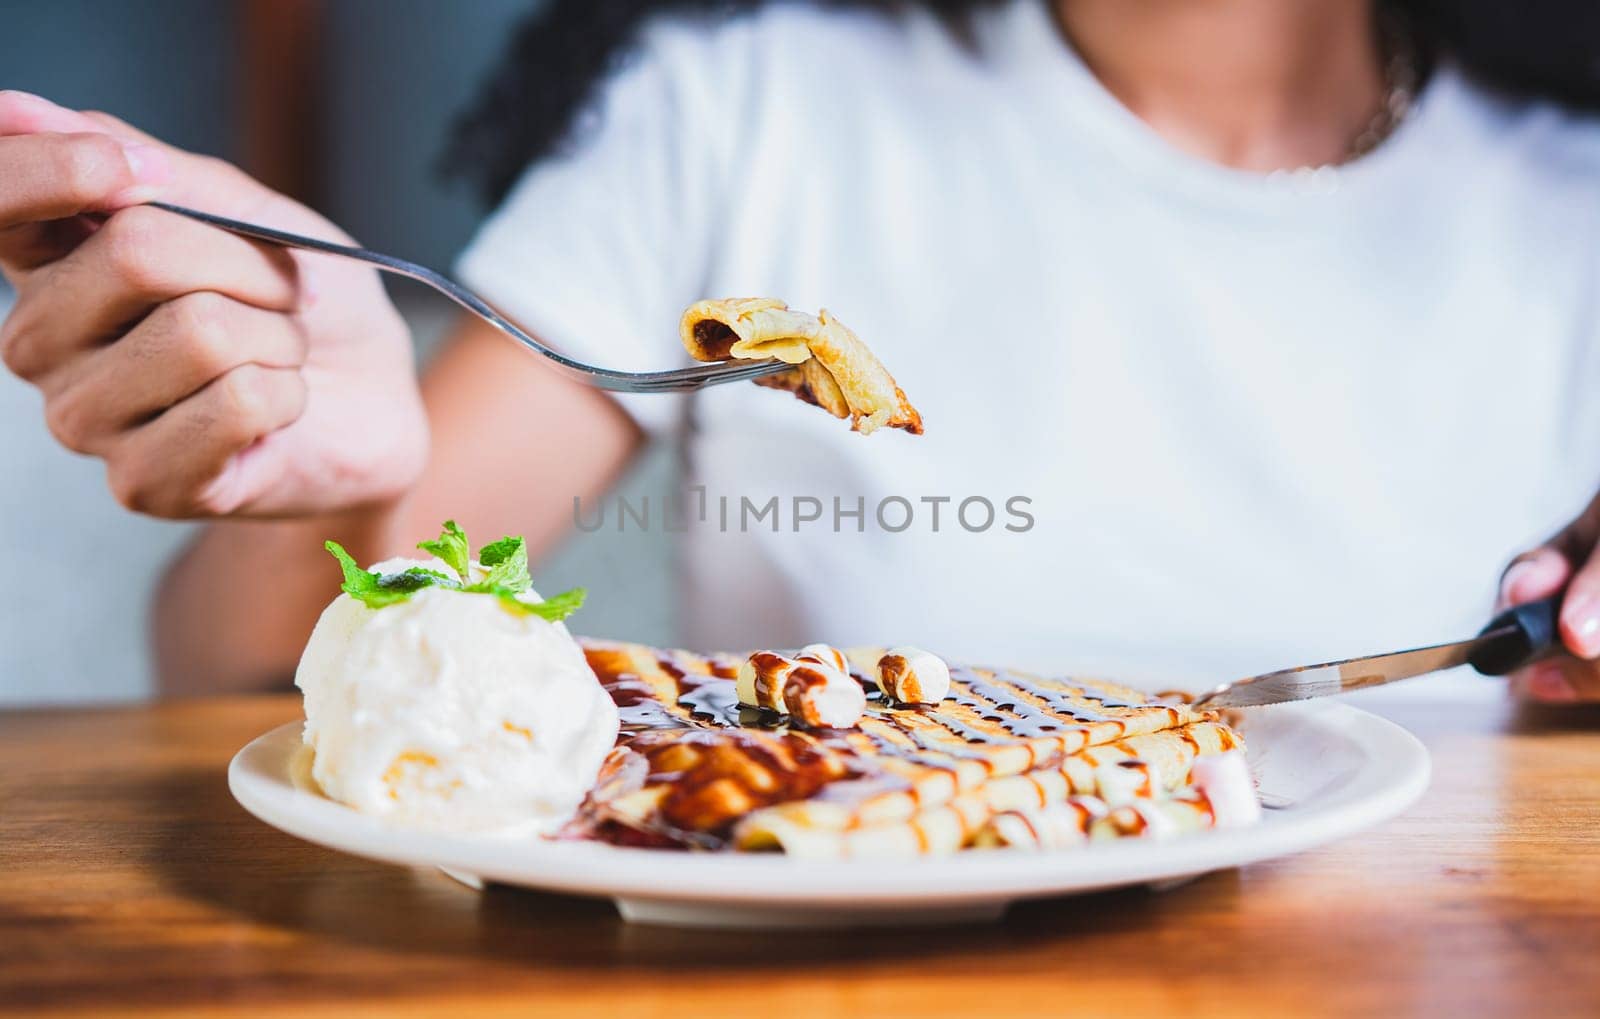 Close up of woman eating chocolate crepe and ice cream with fork. Hands of person with fork cutting chocolate crepe and ice cream